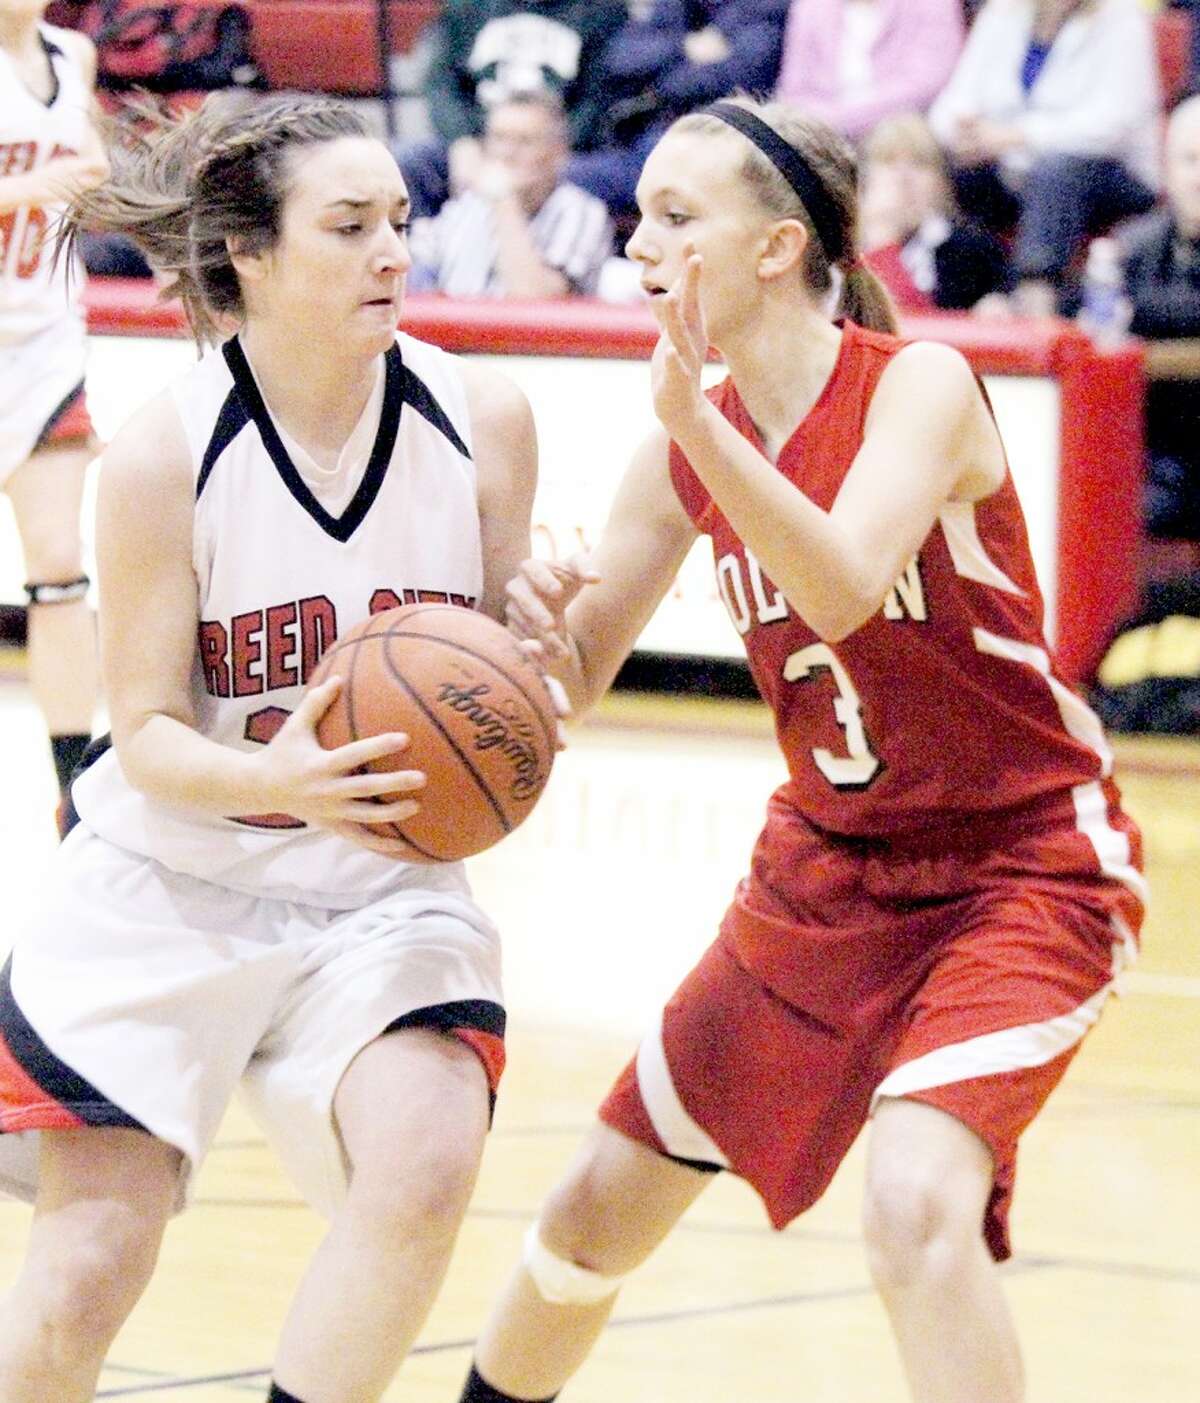 WORKING FOR A WIN: Reed City’s Alex Donley (left) tries to get past Holton’s Katie Wildfong during Friday’s girls basketball contest at Reed City High School. (Herald Review photo/Martin Slagter)